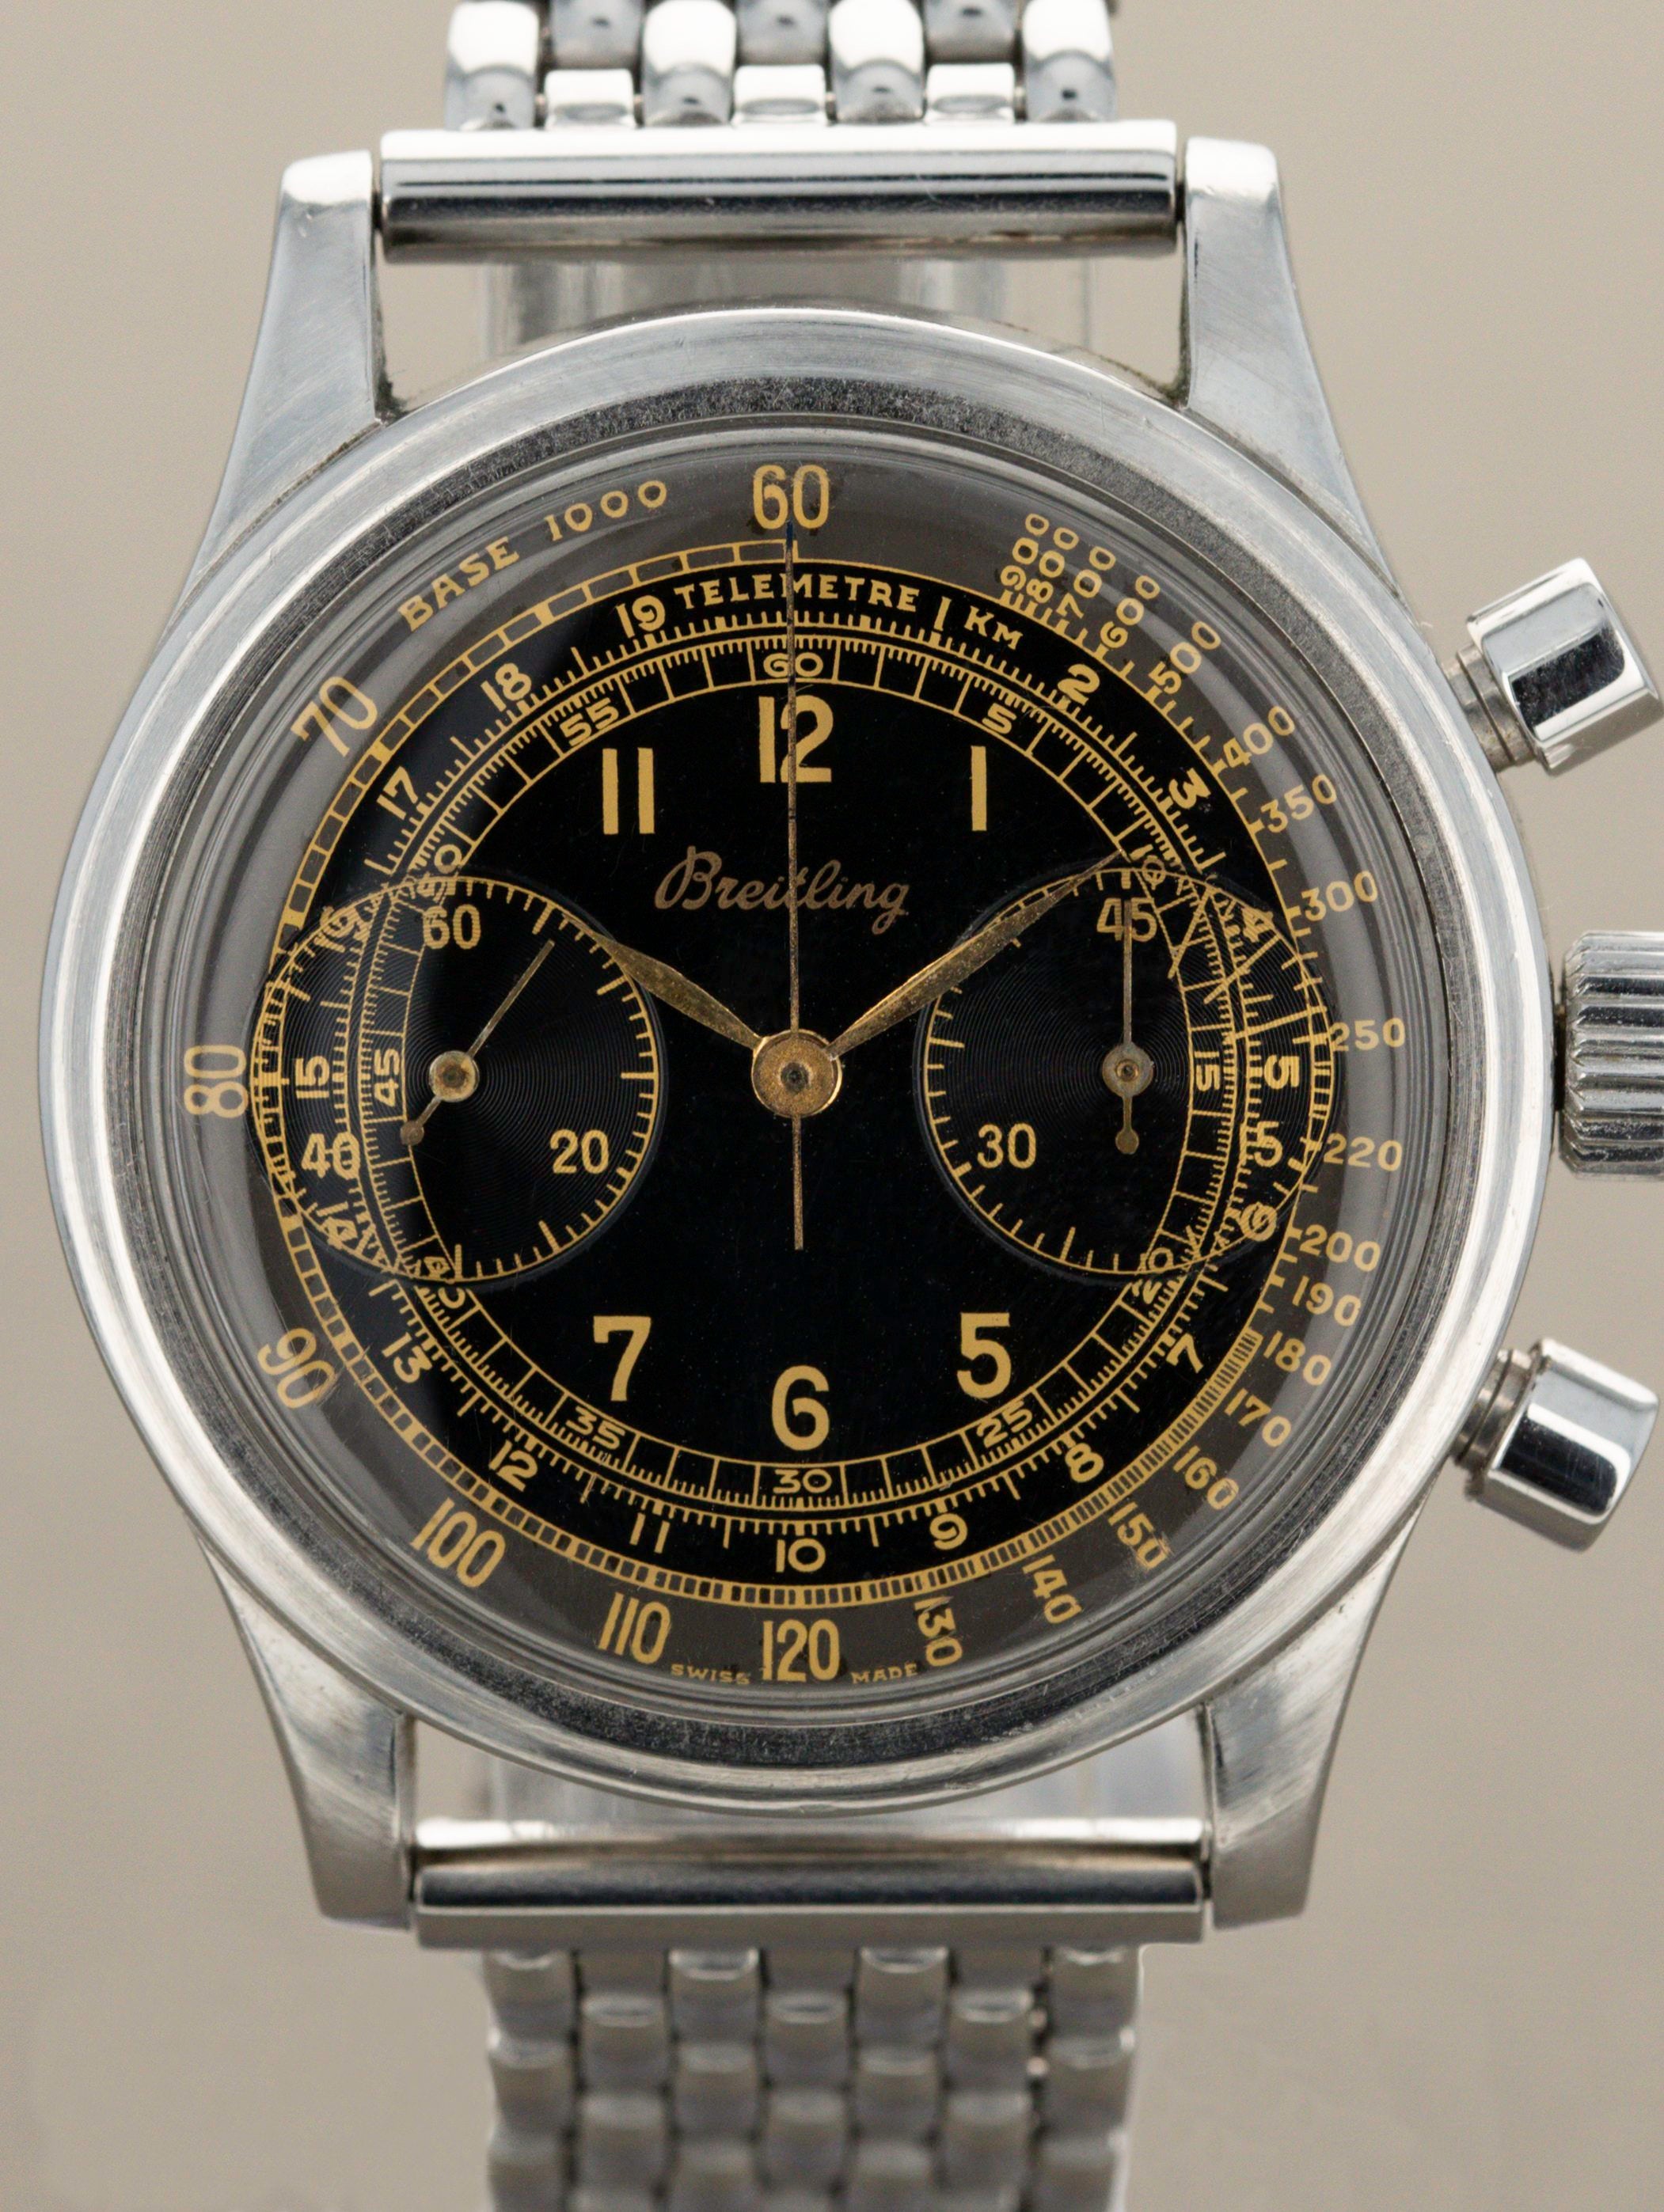 Breitling 'Clamshell' Case Chronograph